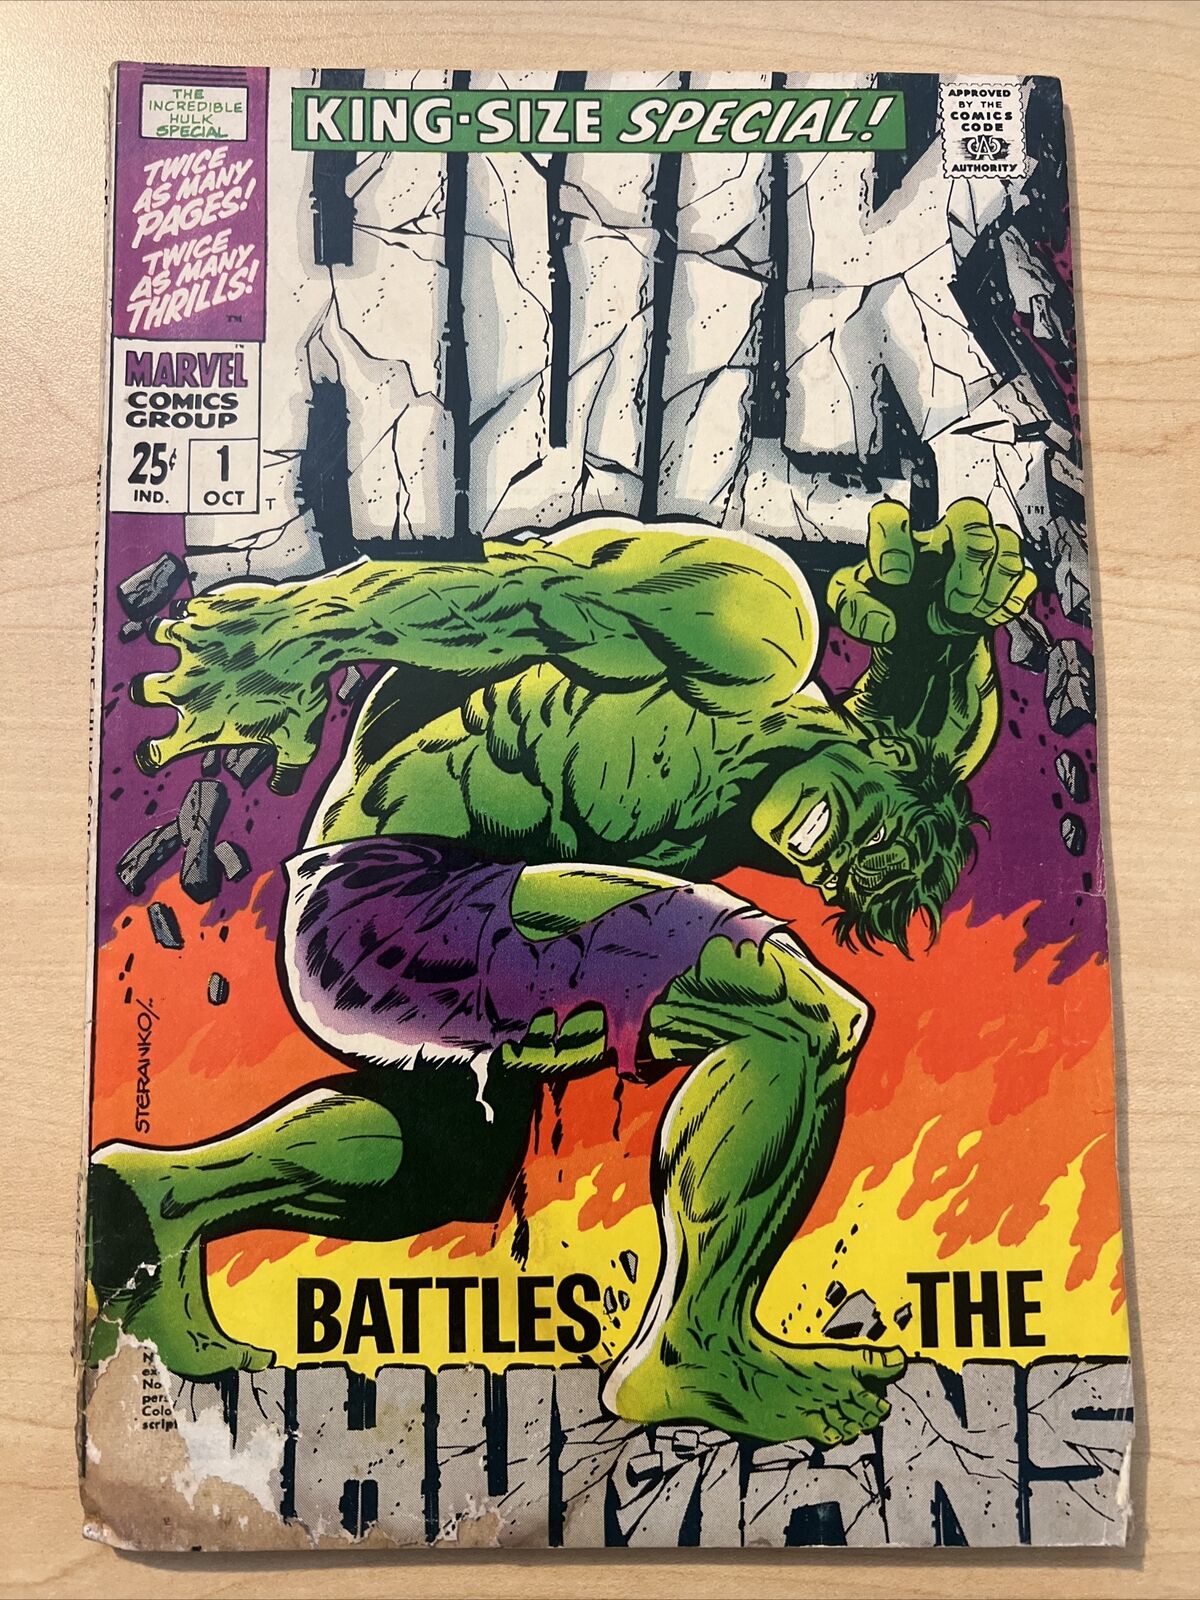 INCREDIBLE HULK KING-SIZE SPECIAL ANNUAL #1 1968 ICONIC JIM STERANKO